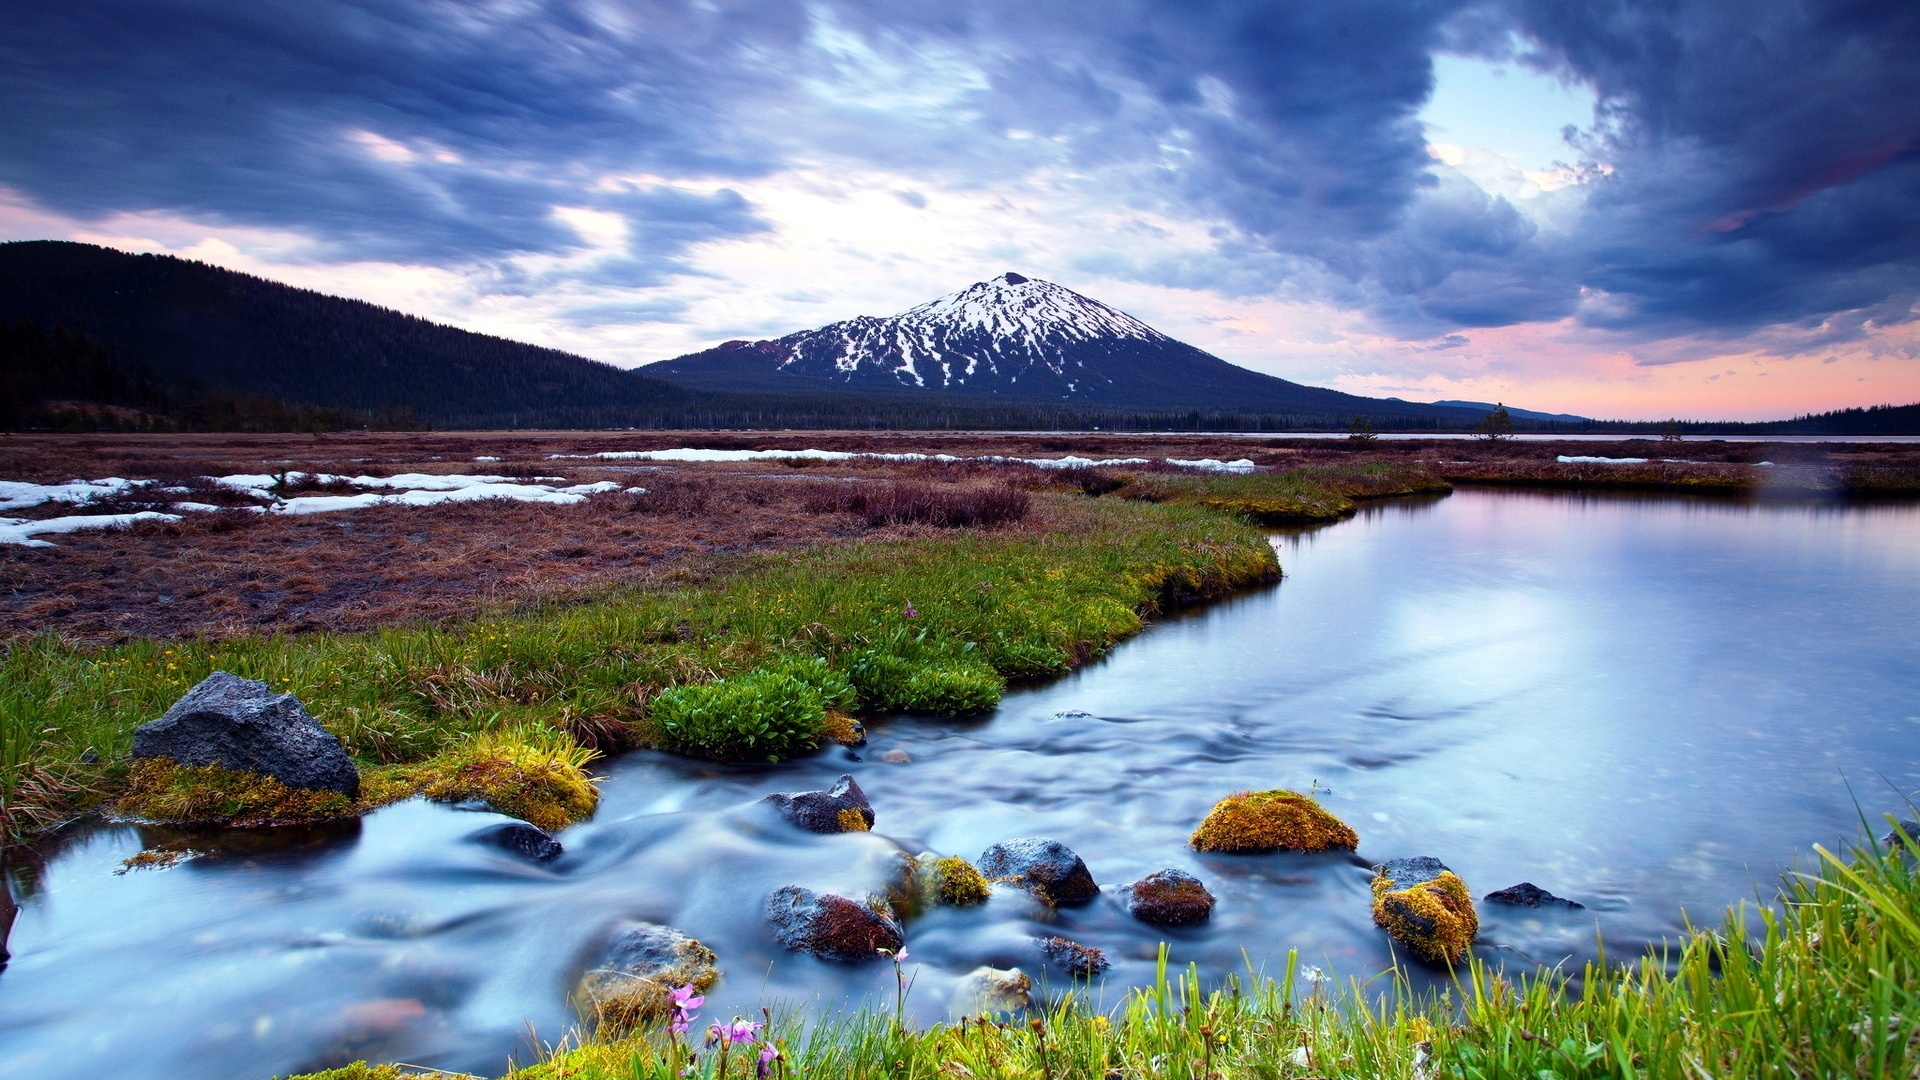 Beautiful Landscape Wallpaper Background For